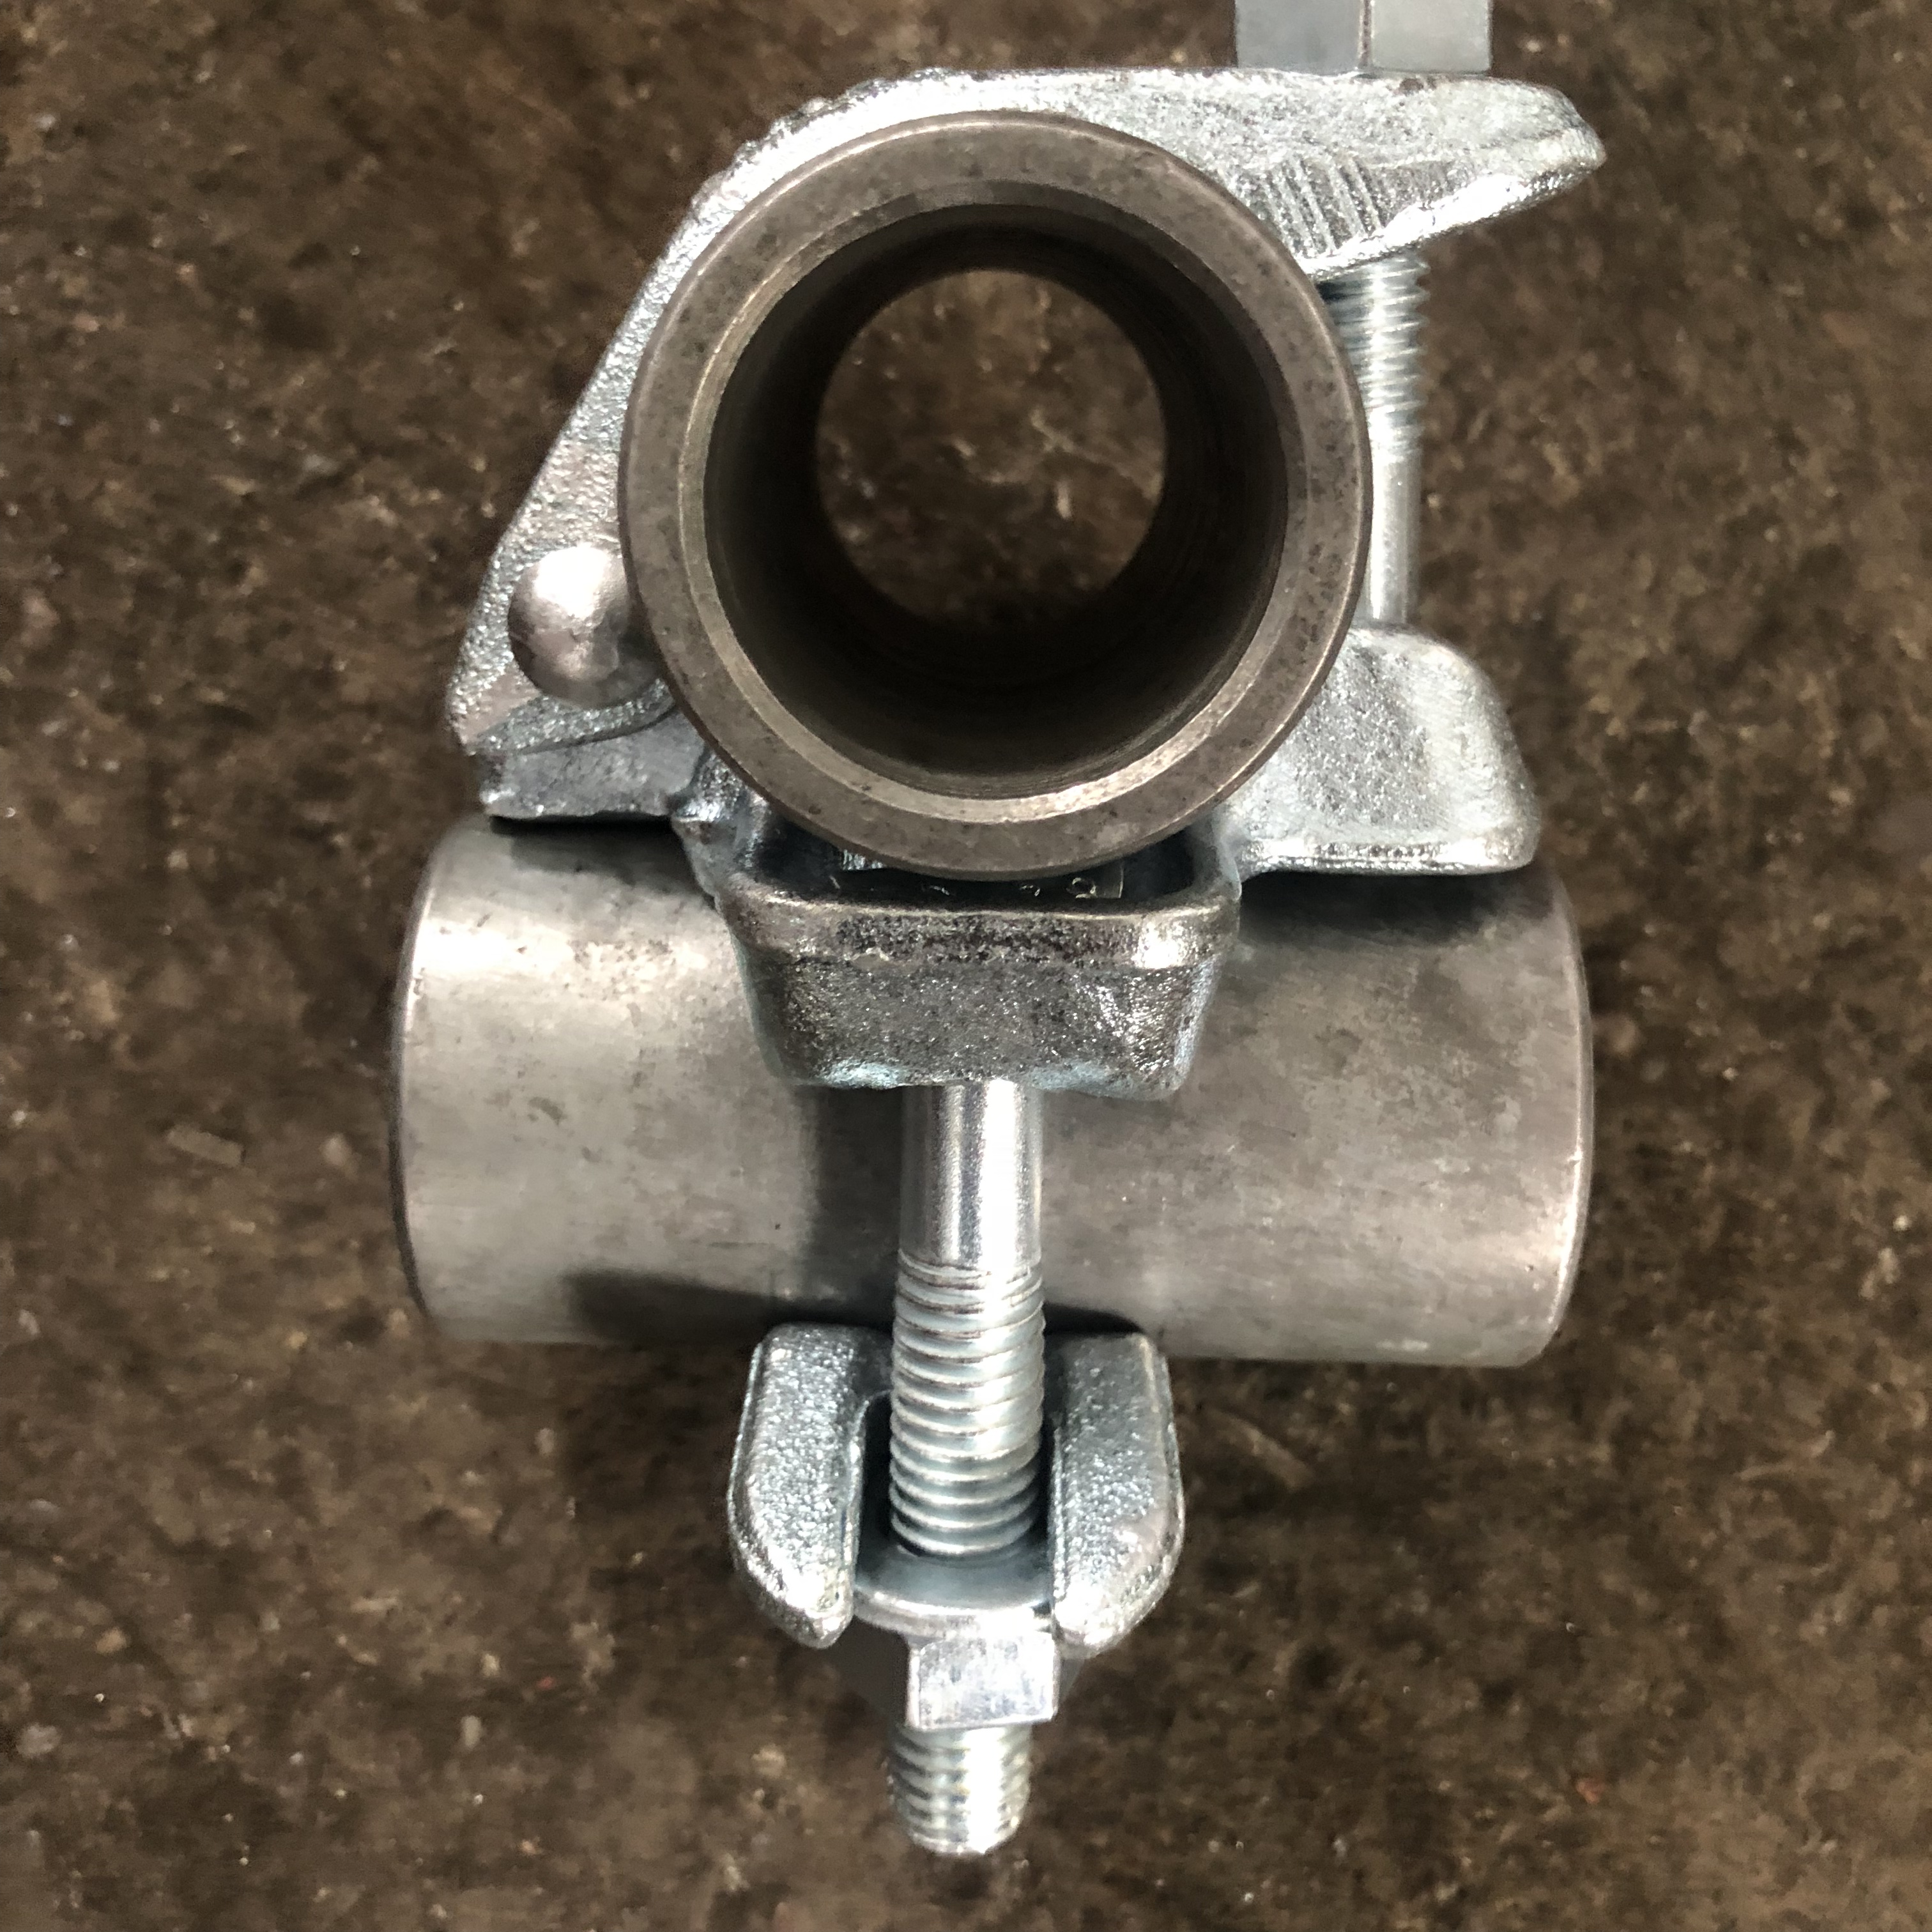 British Drop Forged Scaffolding Right Angle Couplers